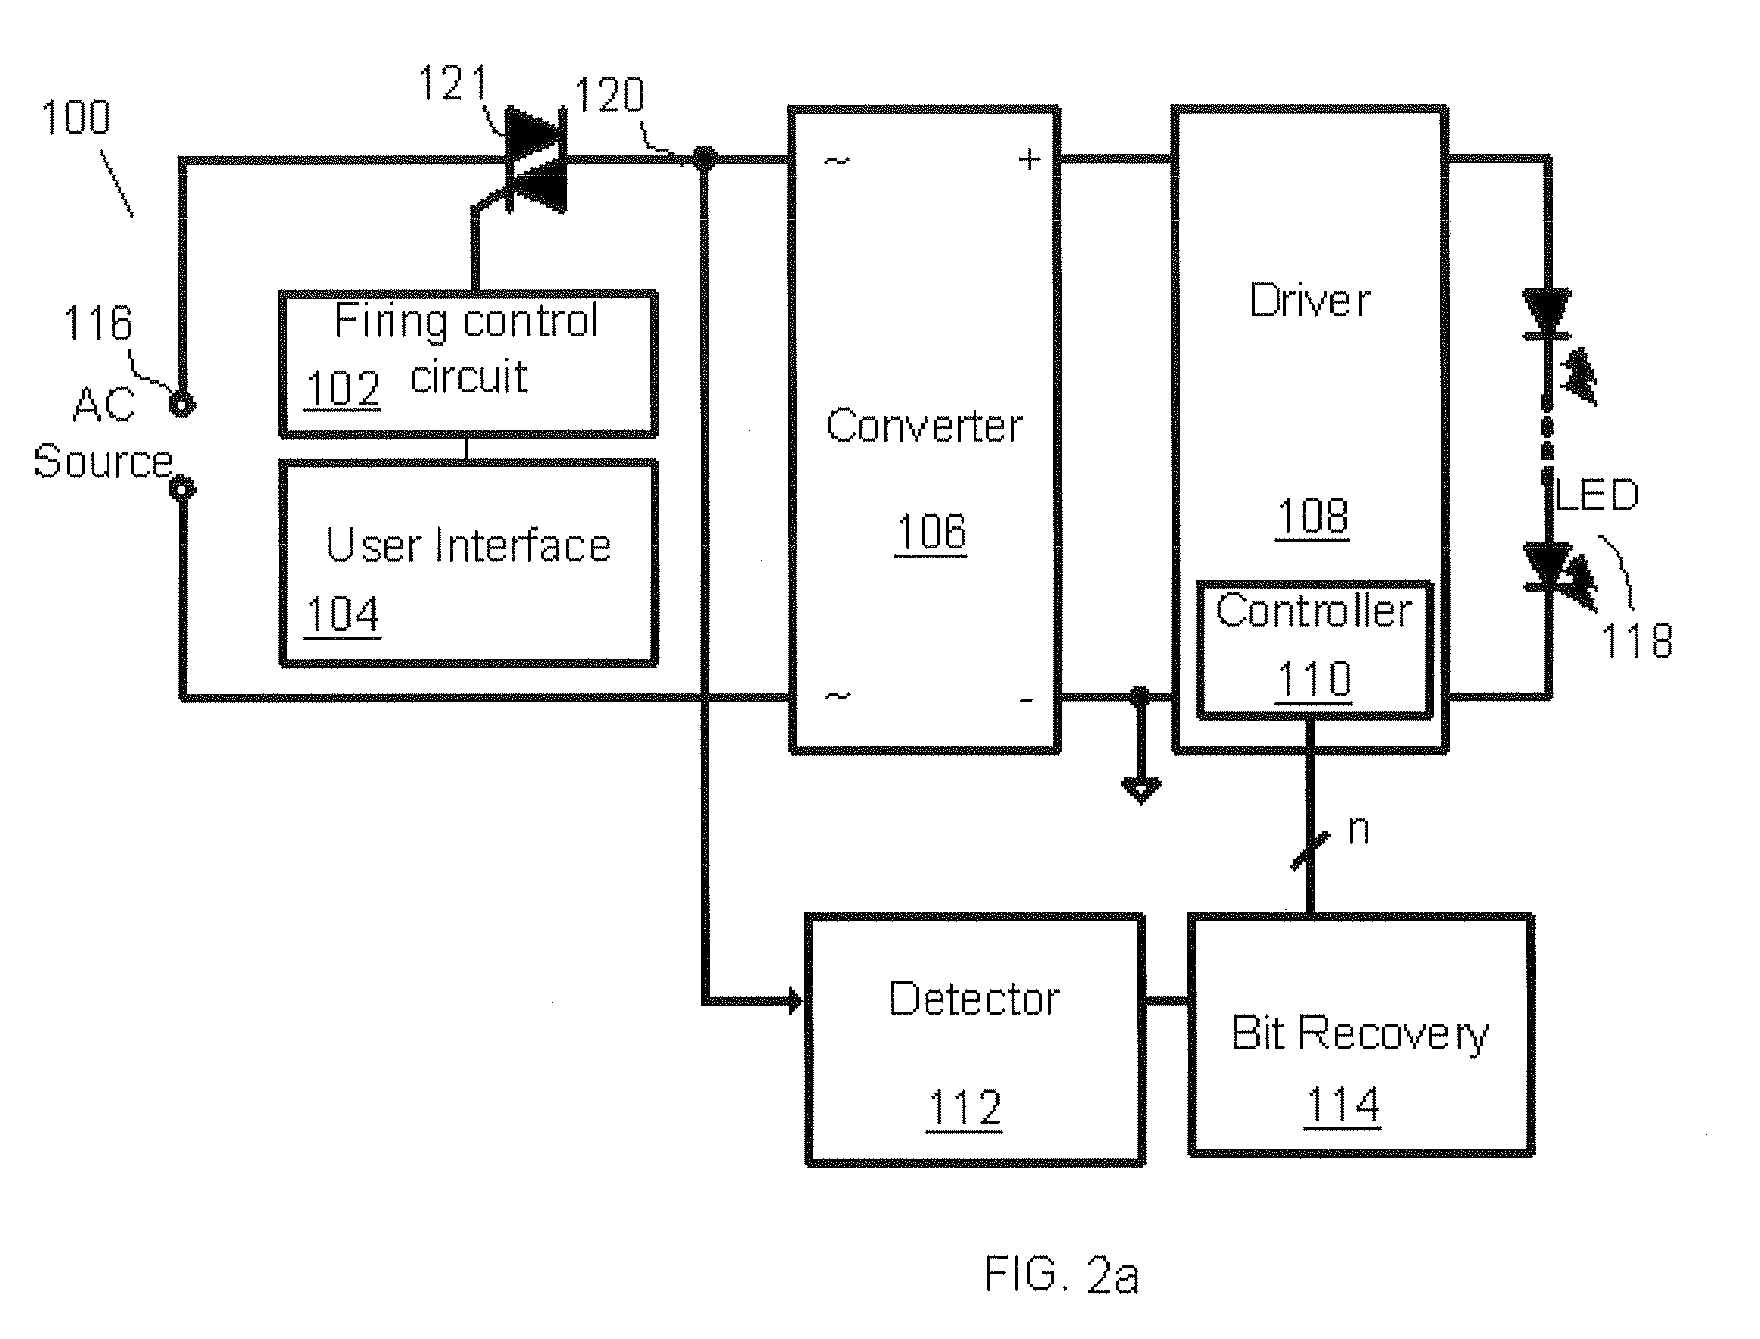 Power line communicaton for electrical fixture control